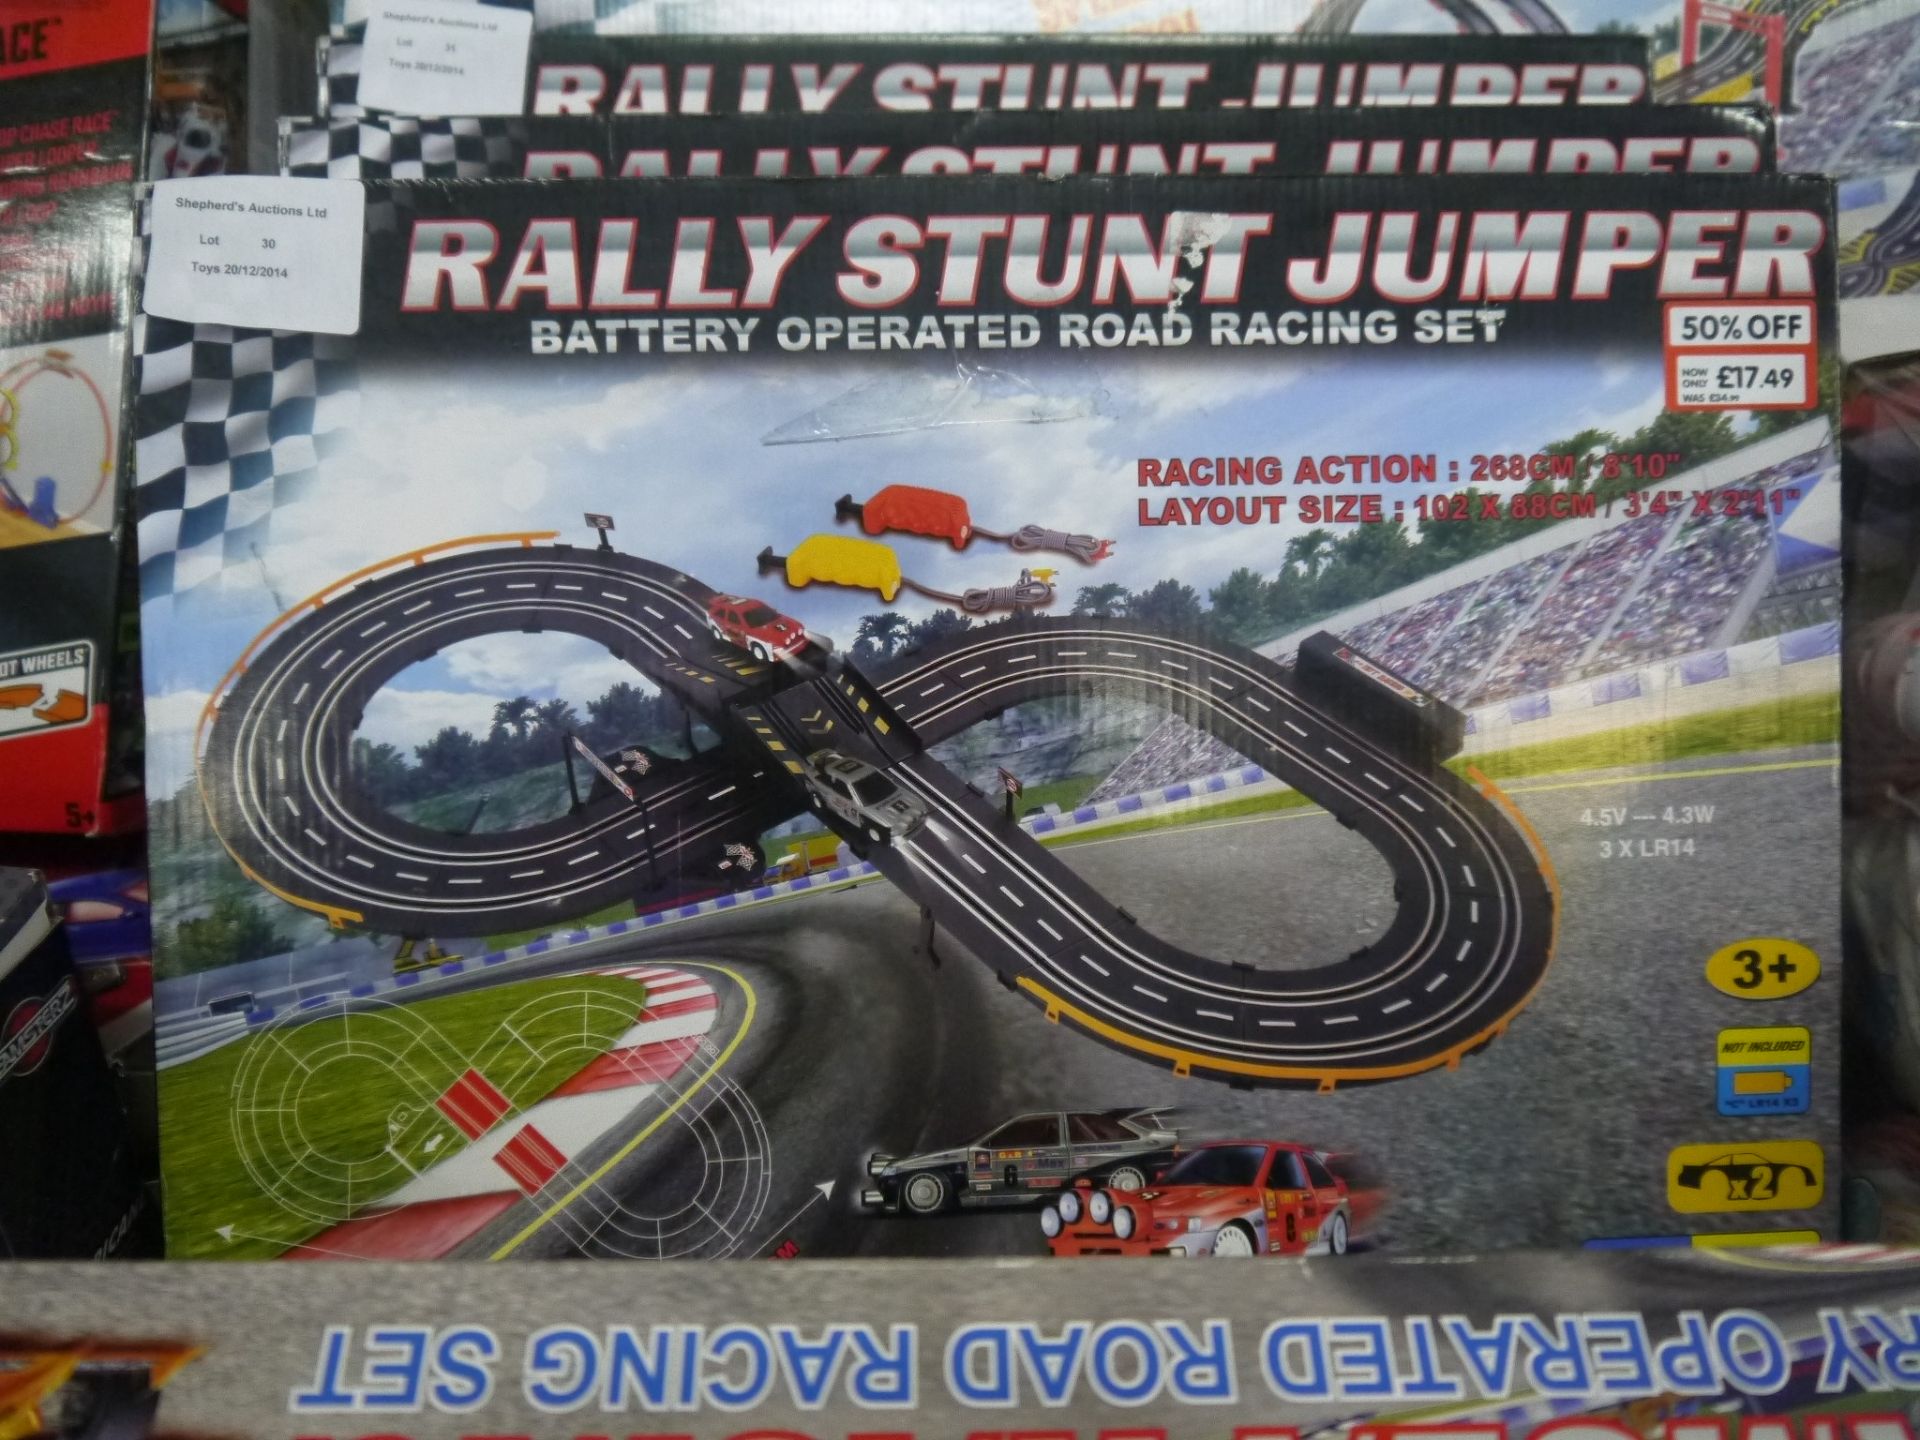 2x Rally Stunt Jumper Racing Battery Operated Road Racing Set. All parts are present, good